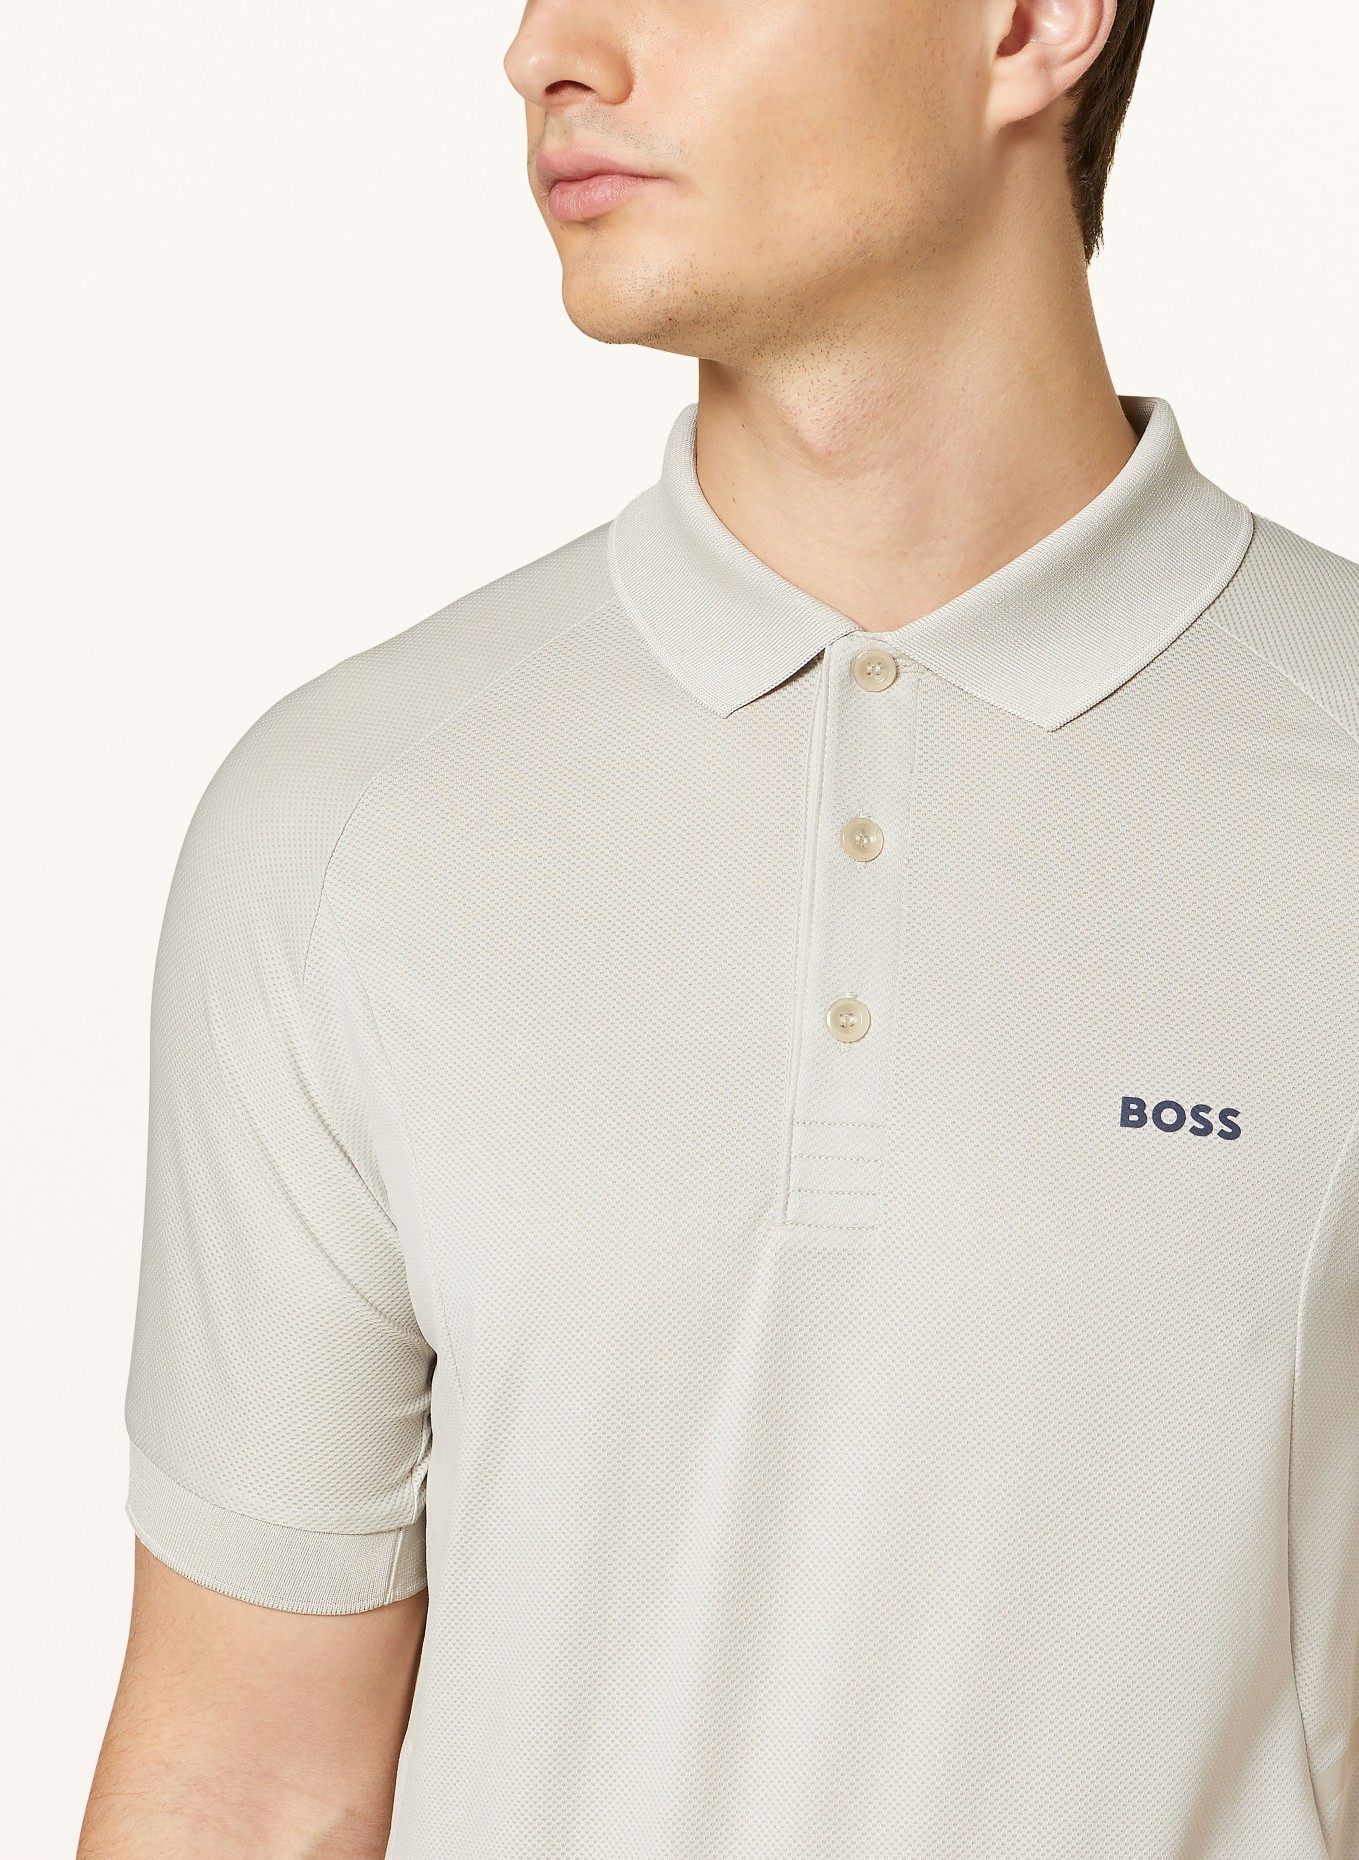 BOSS Performance polo shirt PIRAQ ACTIVE, Color: BEIGE (Image 4)